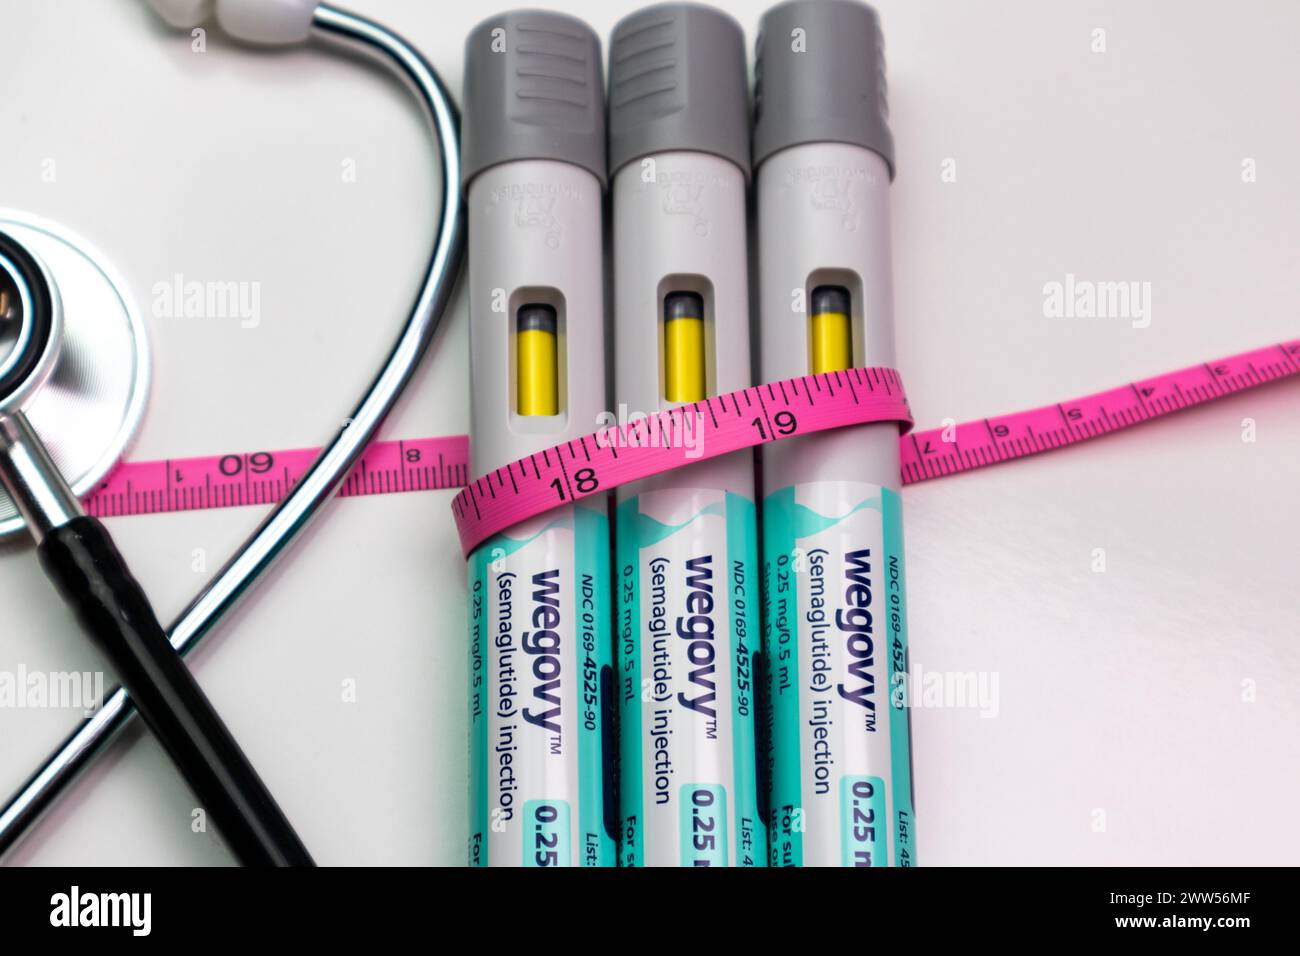 Wegovy auto injector medication pens with pink tape measure and stethoscope Stock Photo